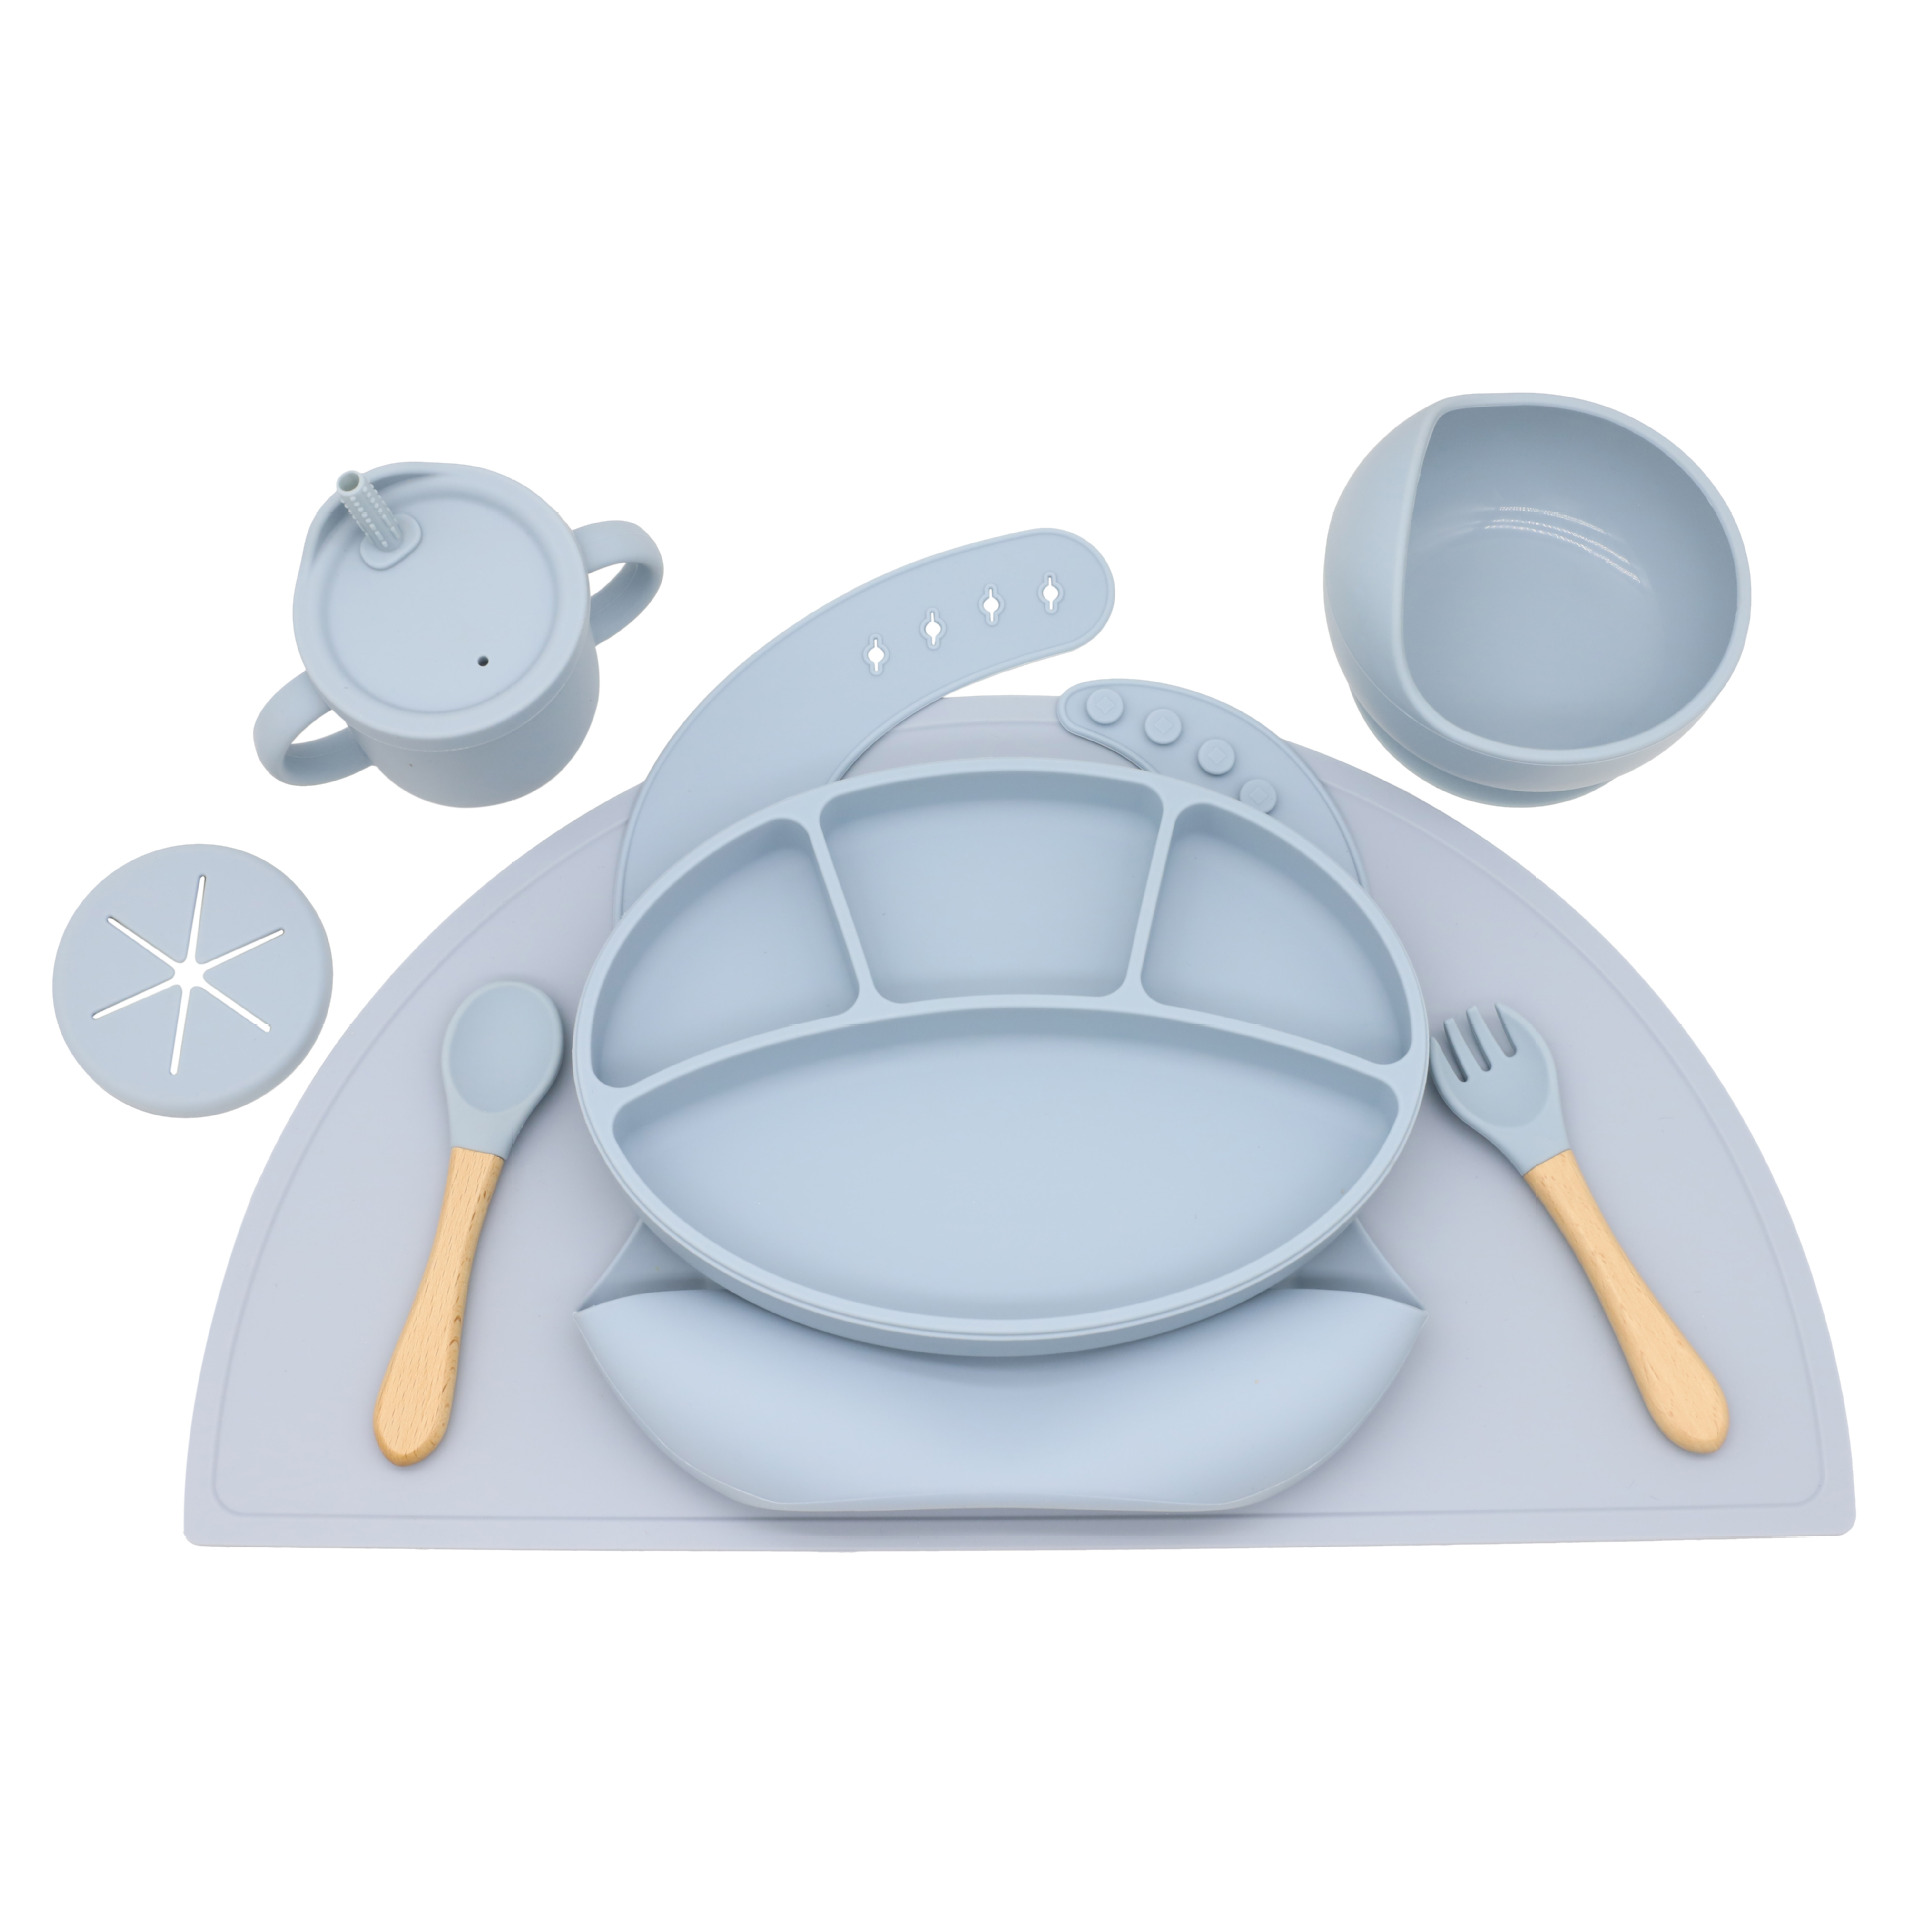 Cross-border Hot Selling Silicone Baby Bib Infant Children Bowl Dinner Plate Placemat Spoon Fork Anti-fall Snack Cup Tableware Set